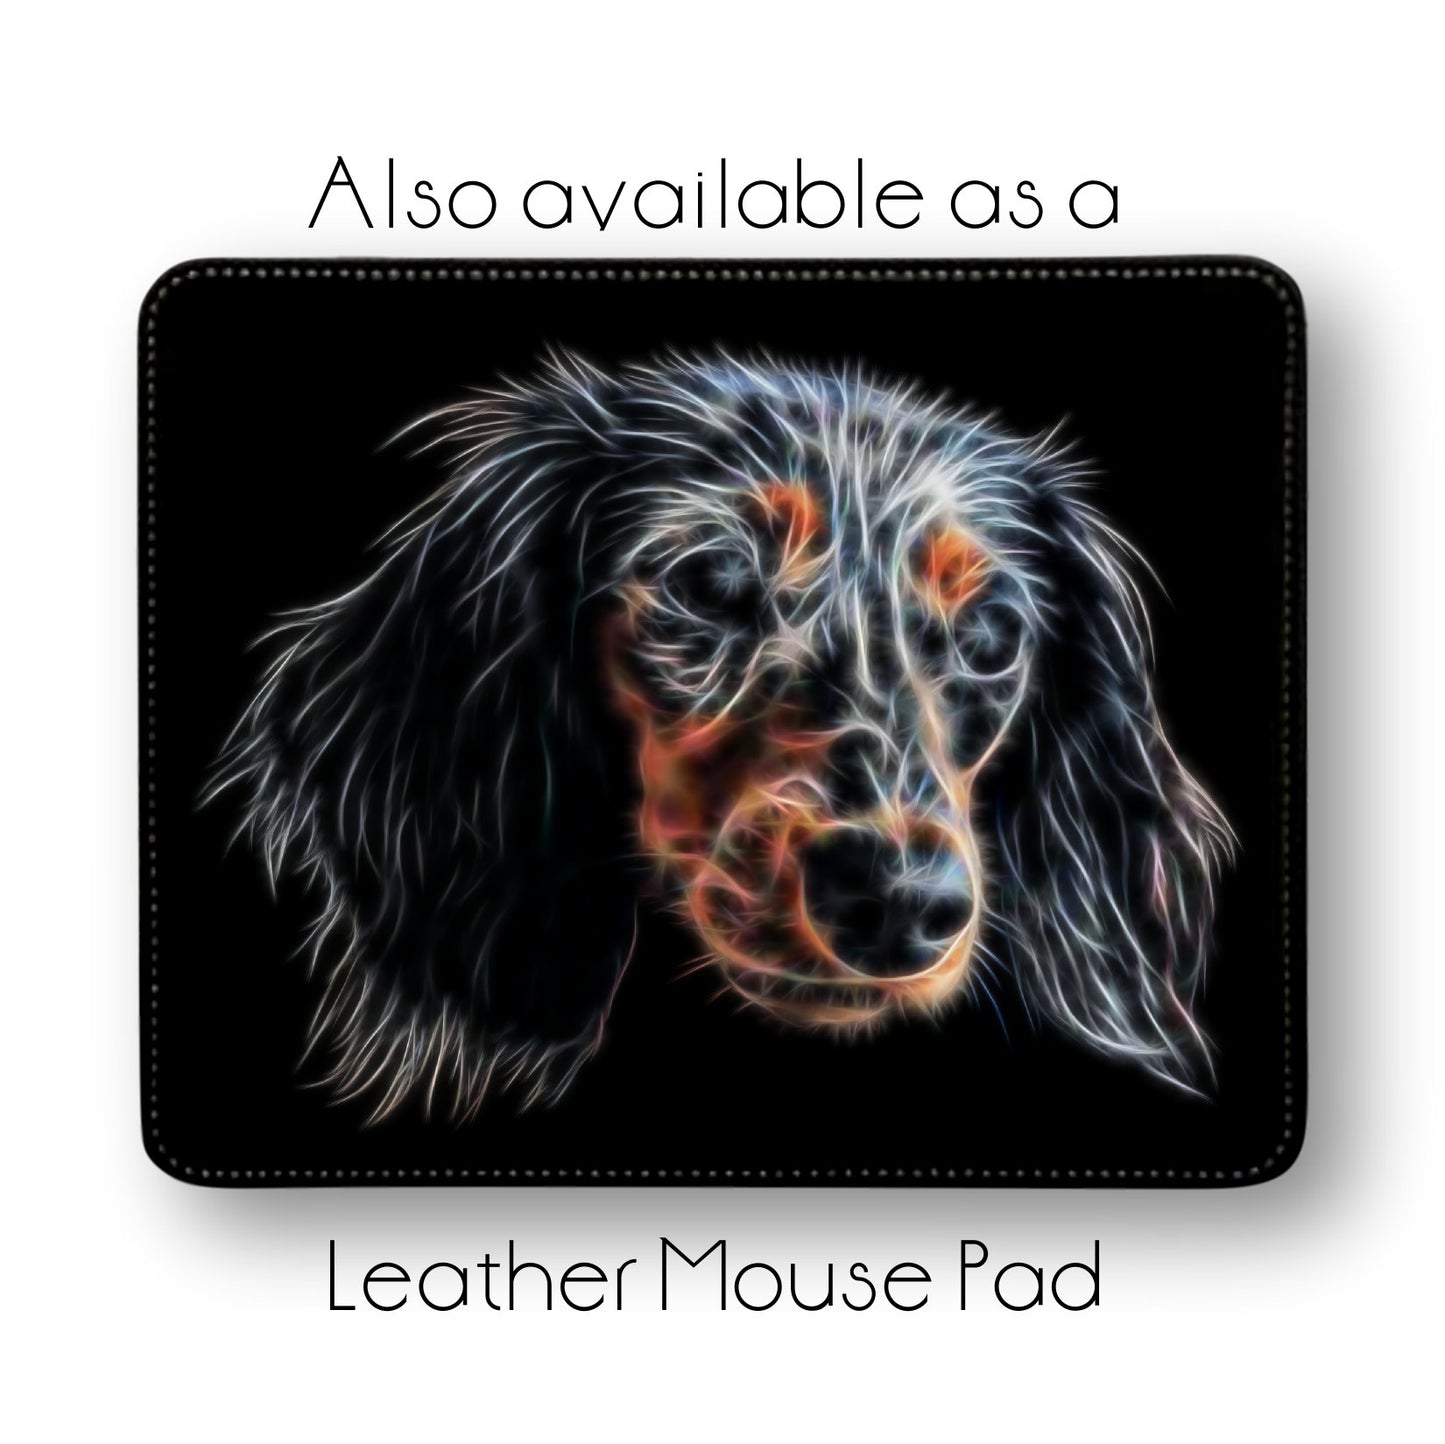 Tricolour Dachshund Metal Wall Plaque. Also available as Mouse Pad, Keychain or Coaster.